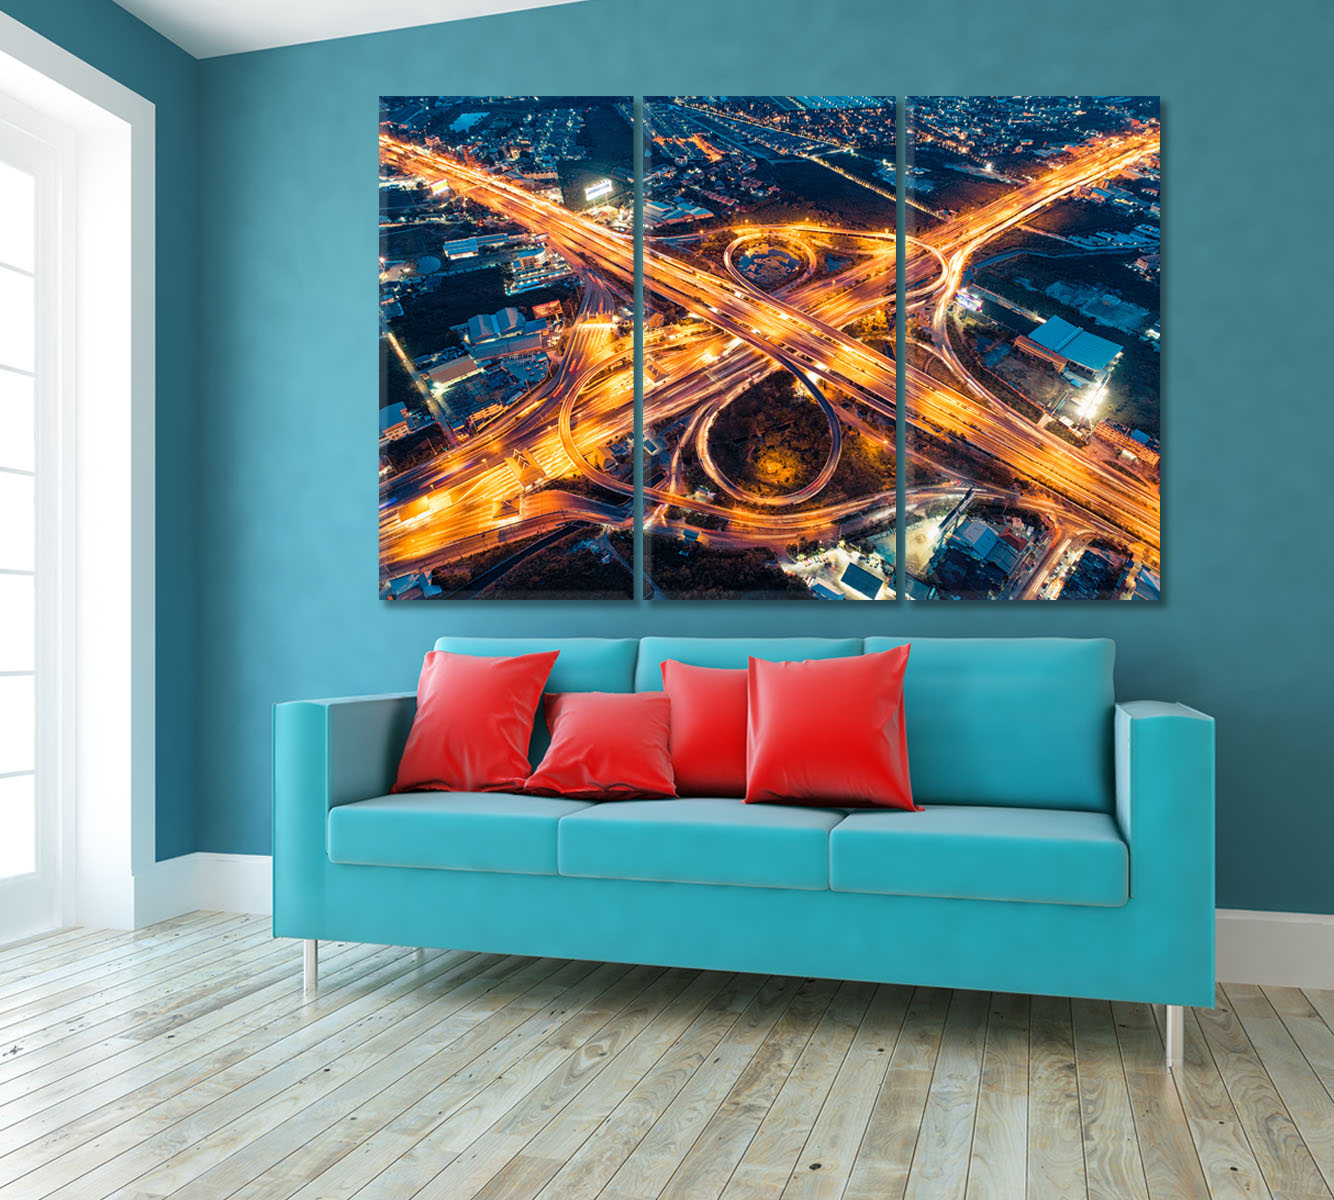 Expressway at Night Canvas Print ArtLexy 3 Panels 36"x24" inches 